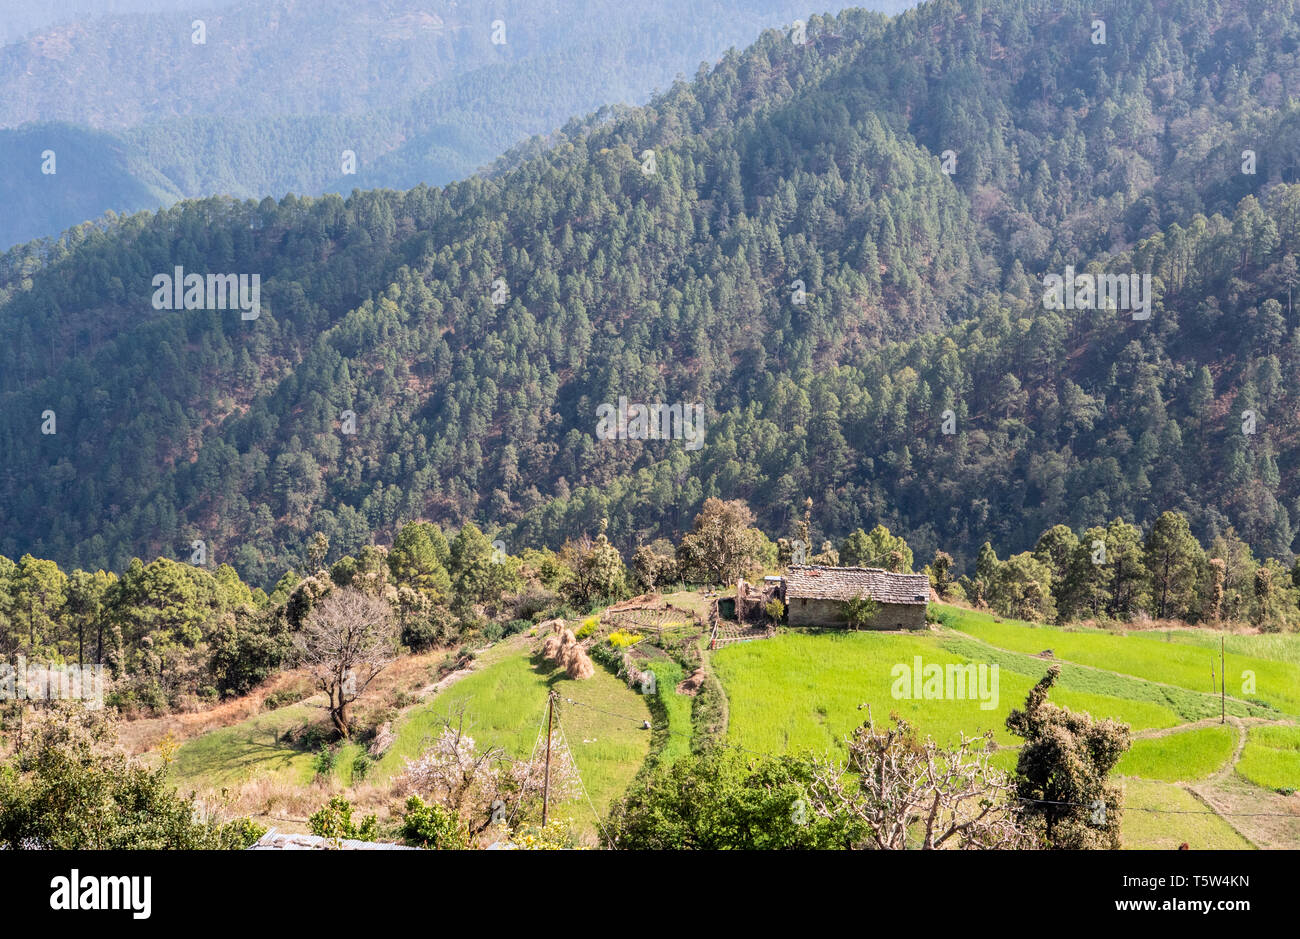 Farmhouse haystacks and wooded mountain slopes in the Himalayan foothills at Gonaphigh above the Binsar valley in Uttarakhand Northern India Stock Photo